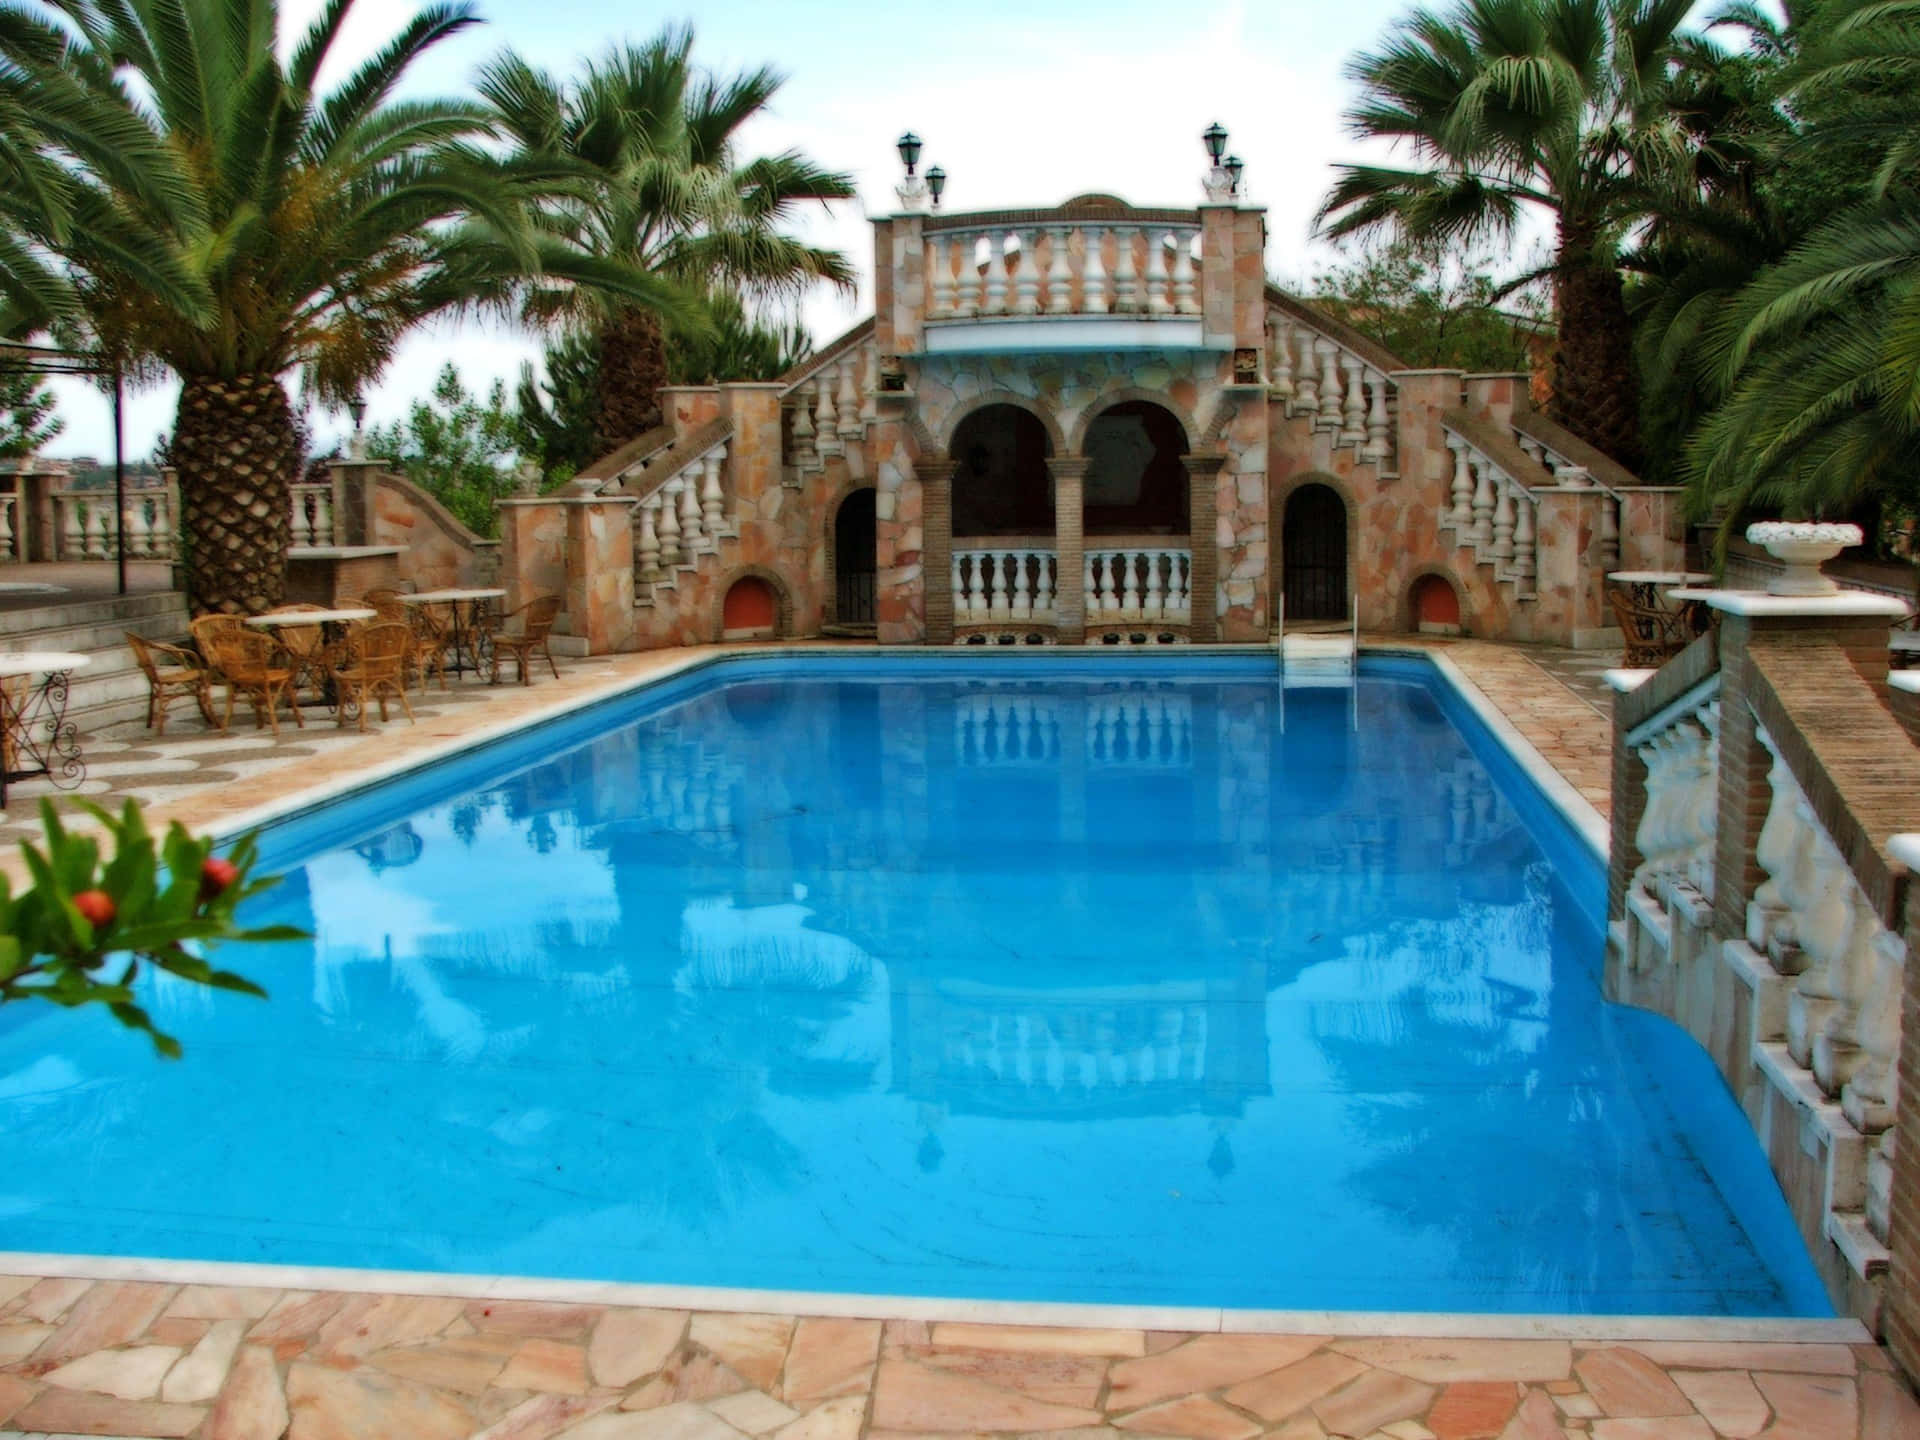 A Pool With A Stone Wall